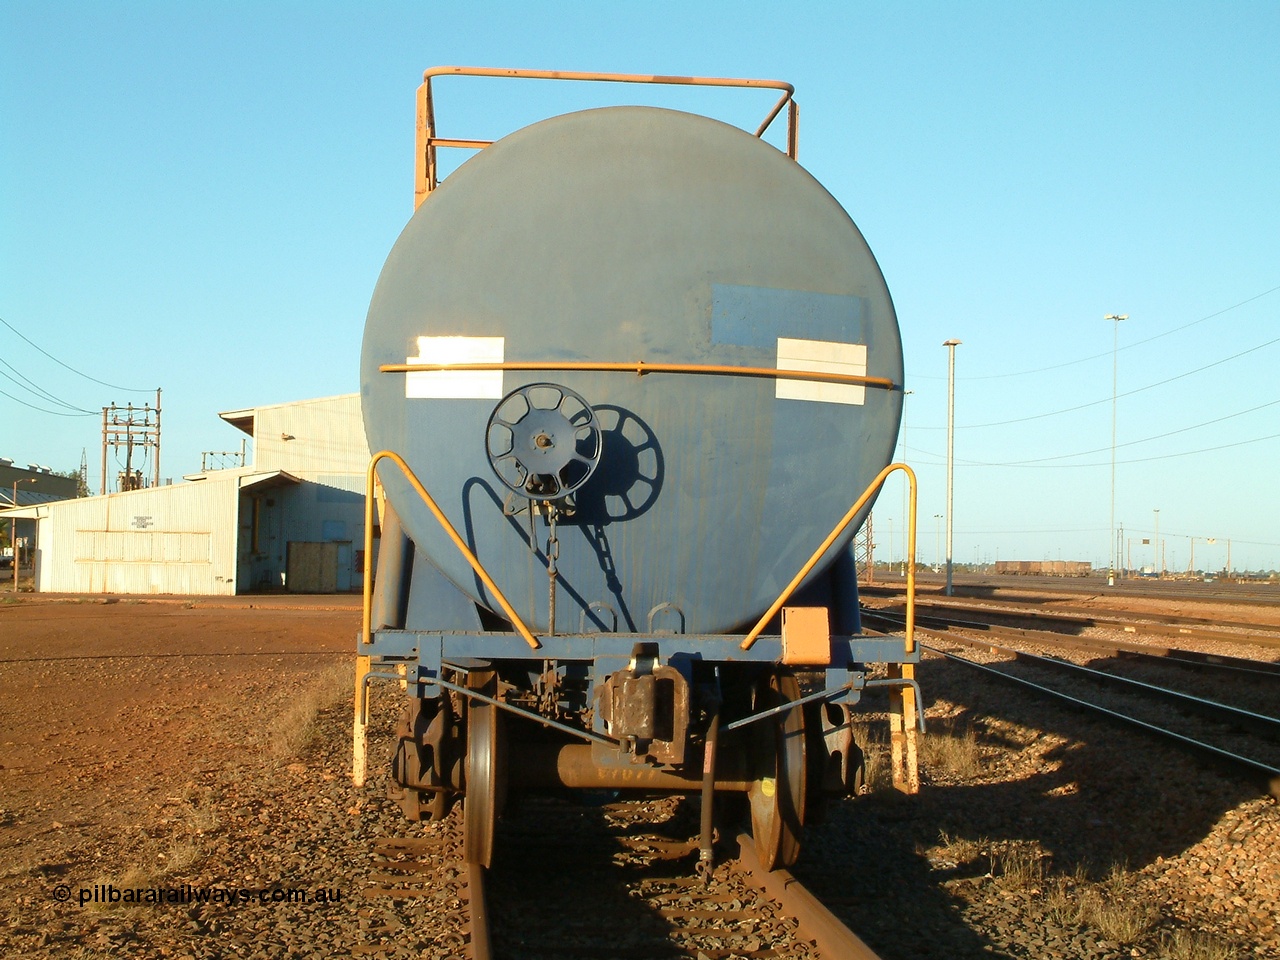 040815 171504
Nelson Point, view of hand brake end of fuel tank waggon 0020, 82 kilolitre capacity built by Comeng NSW for BP as RTC 2, used by Mt Newman Mining, unsure when converted to 0020.
Keywords: Comeng-NSW;RTC2;BHP-tank-waggon;